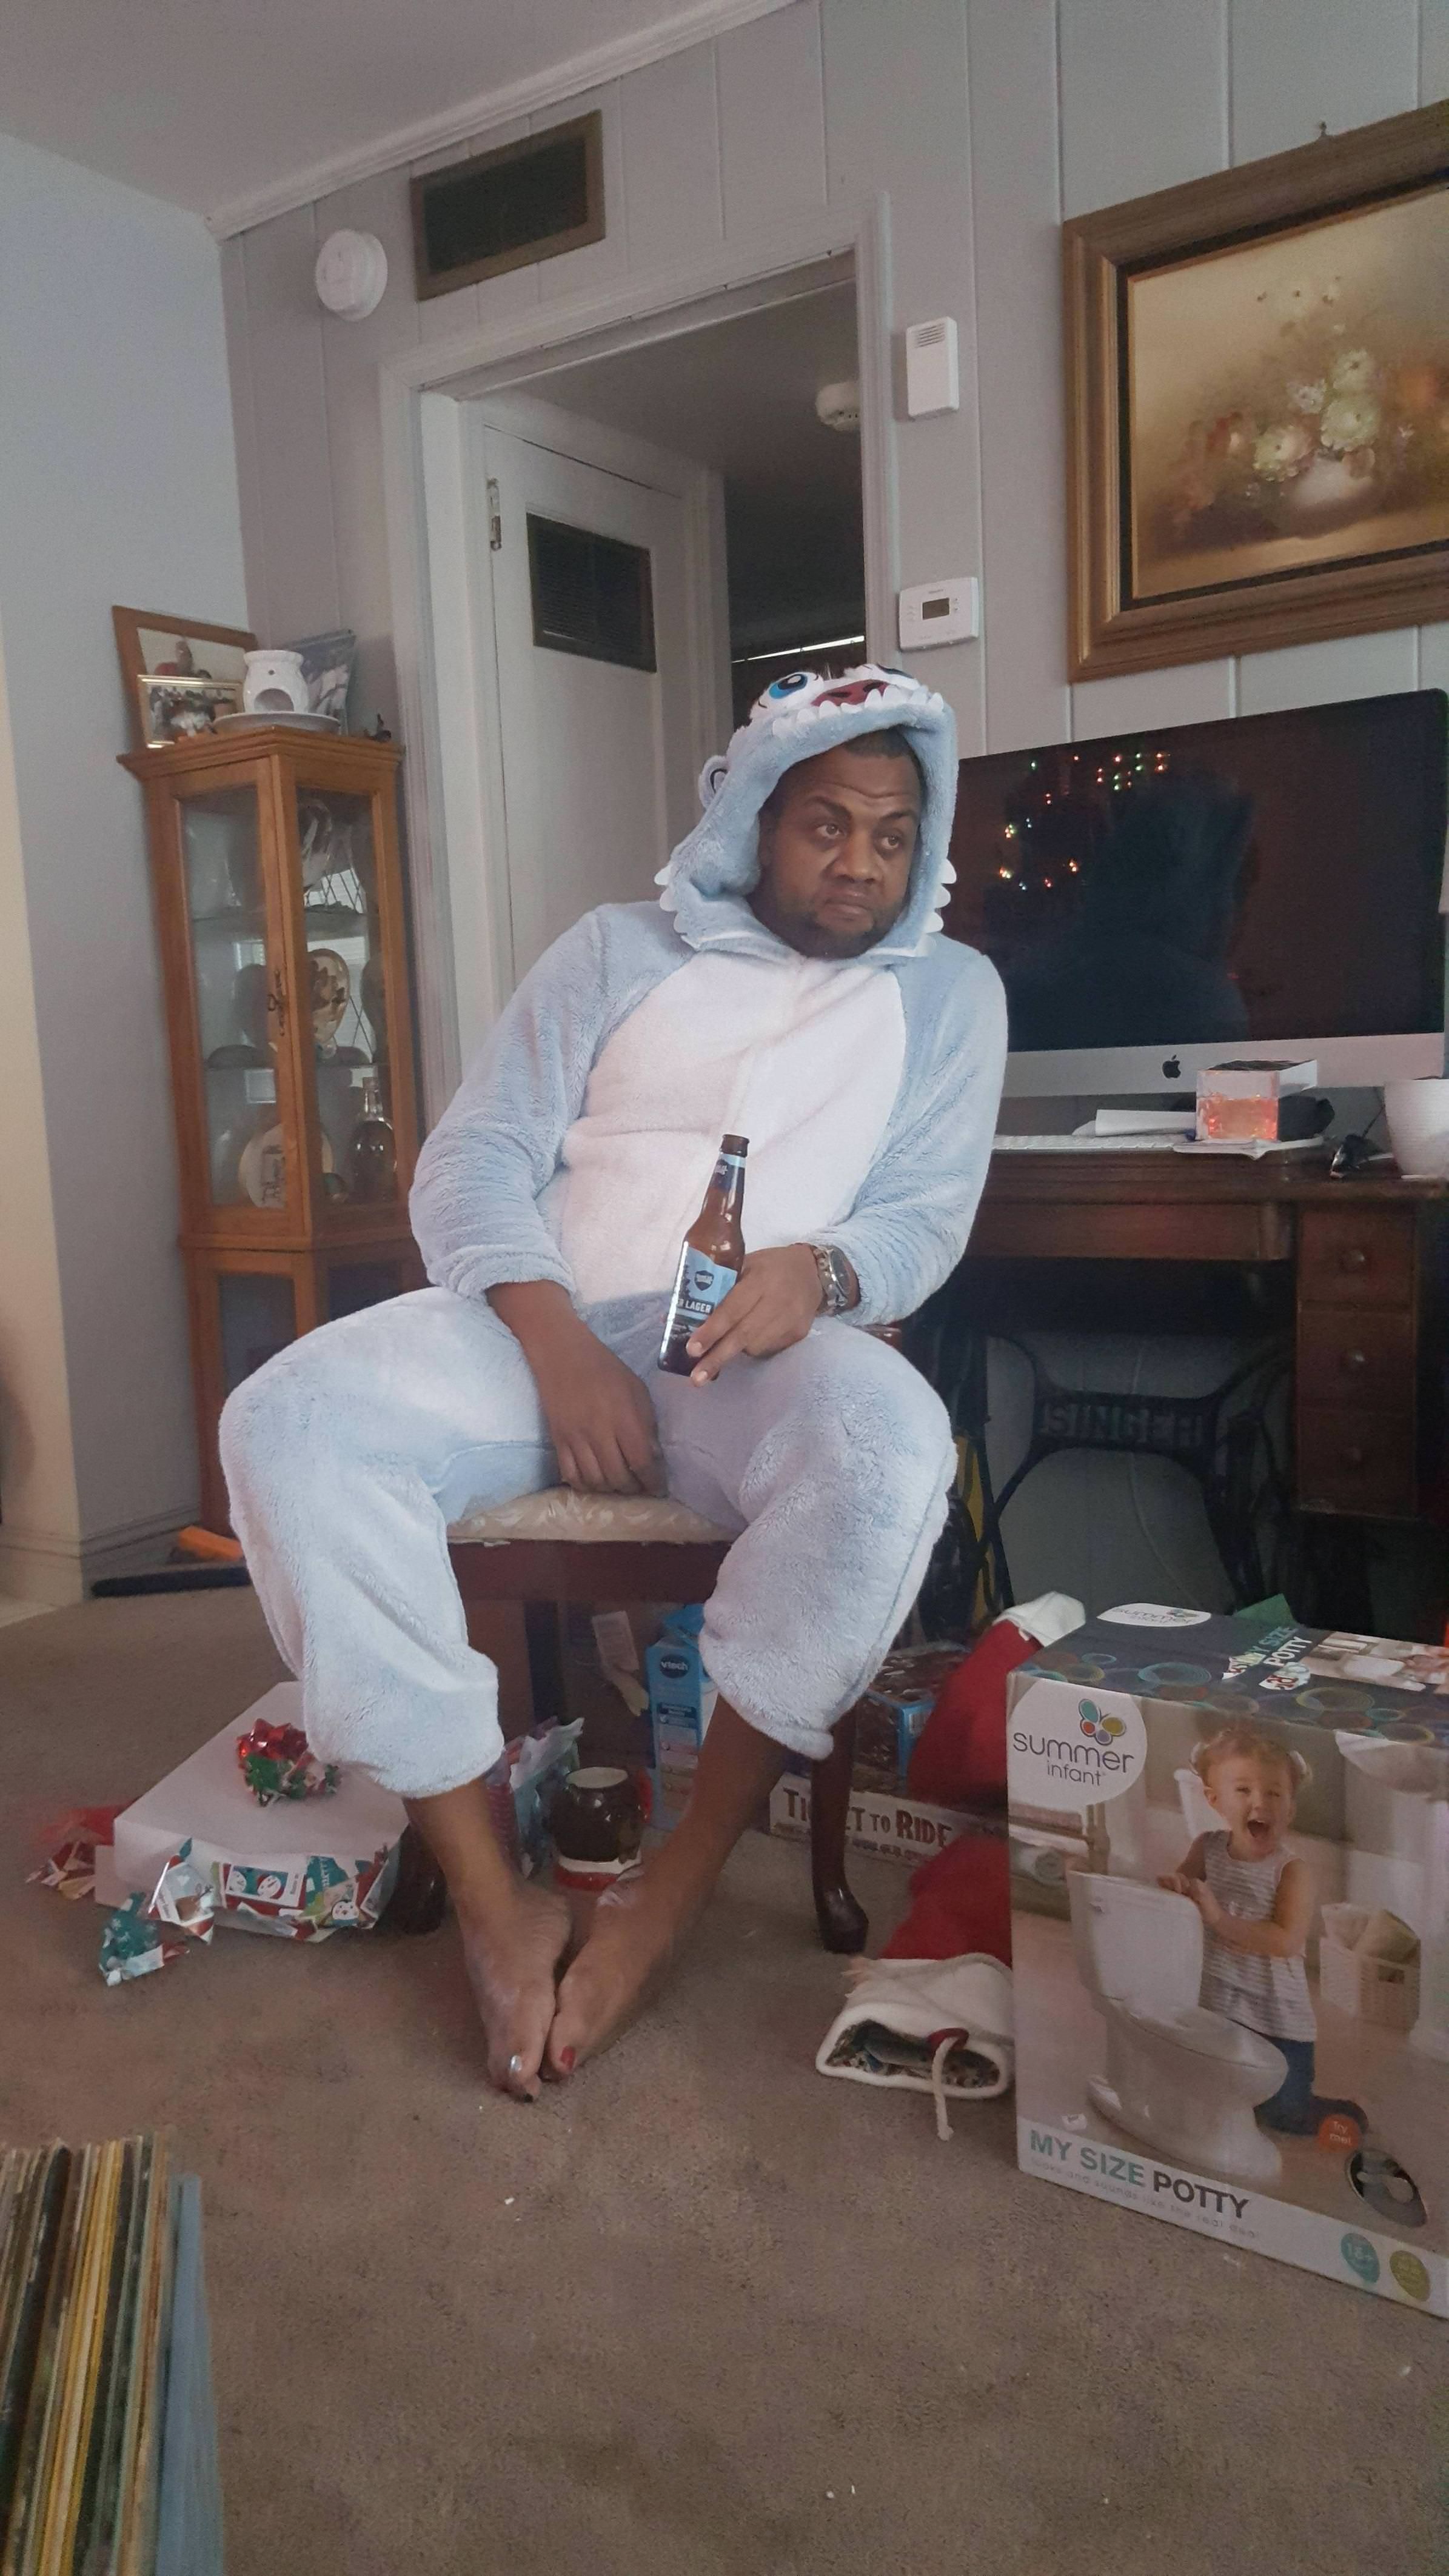 My brother-in-law, who has 2 girls, taking in the aftermath of Christmas morning, wearing a Yeti Onesie that they picked out for him.